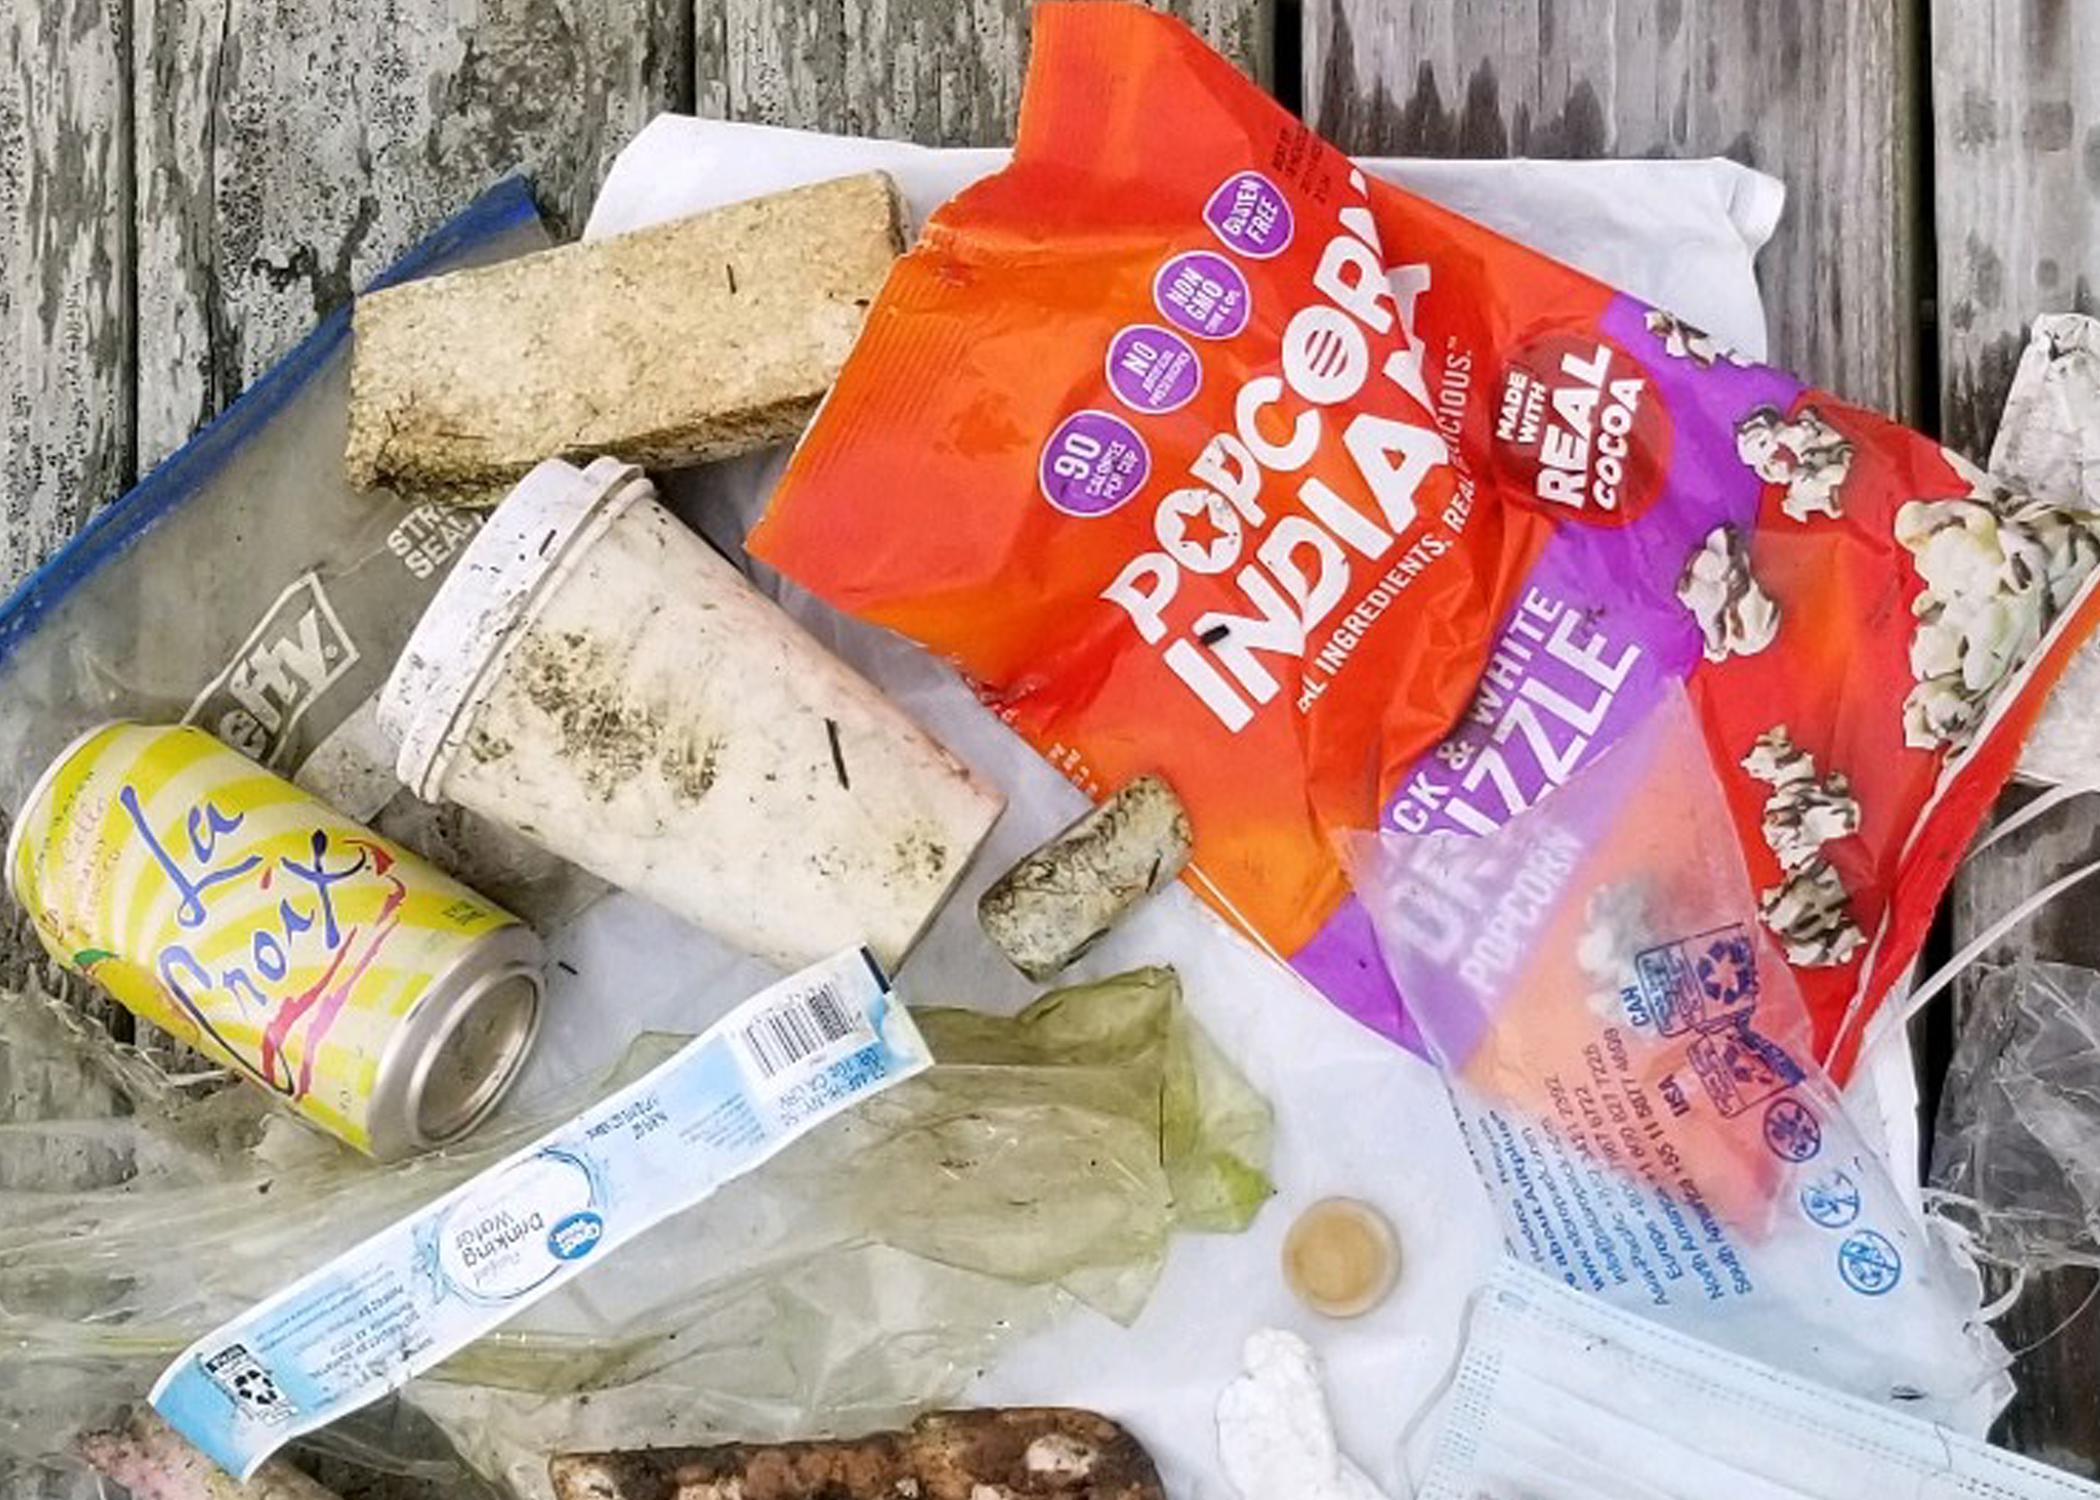 An assortment of litter retrieved from a watershed displayed on a wooden dock. 